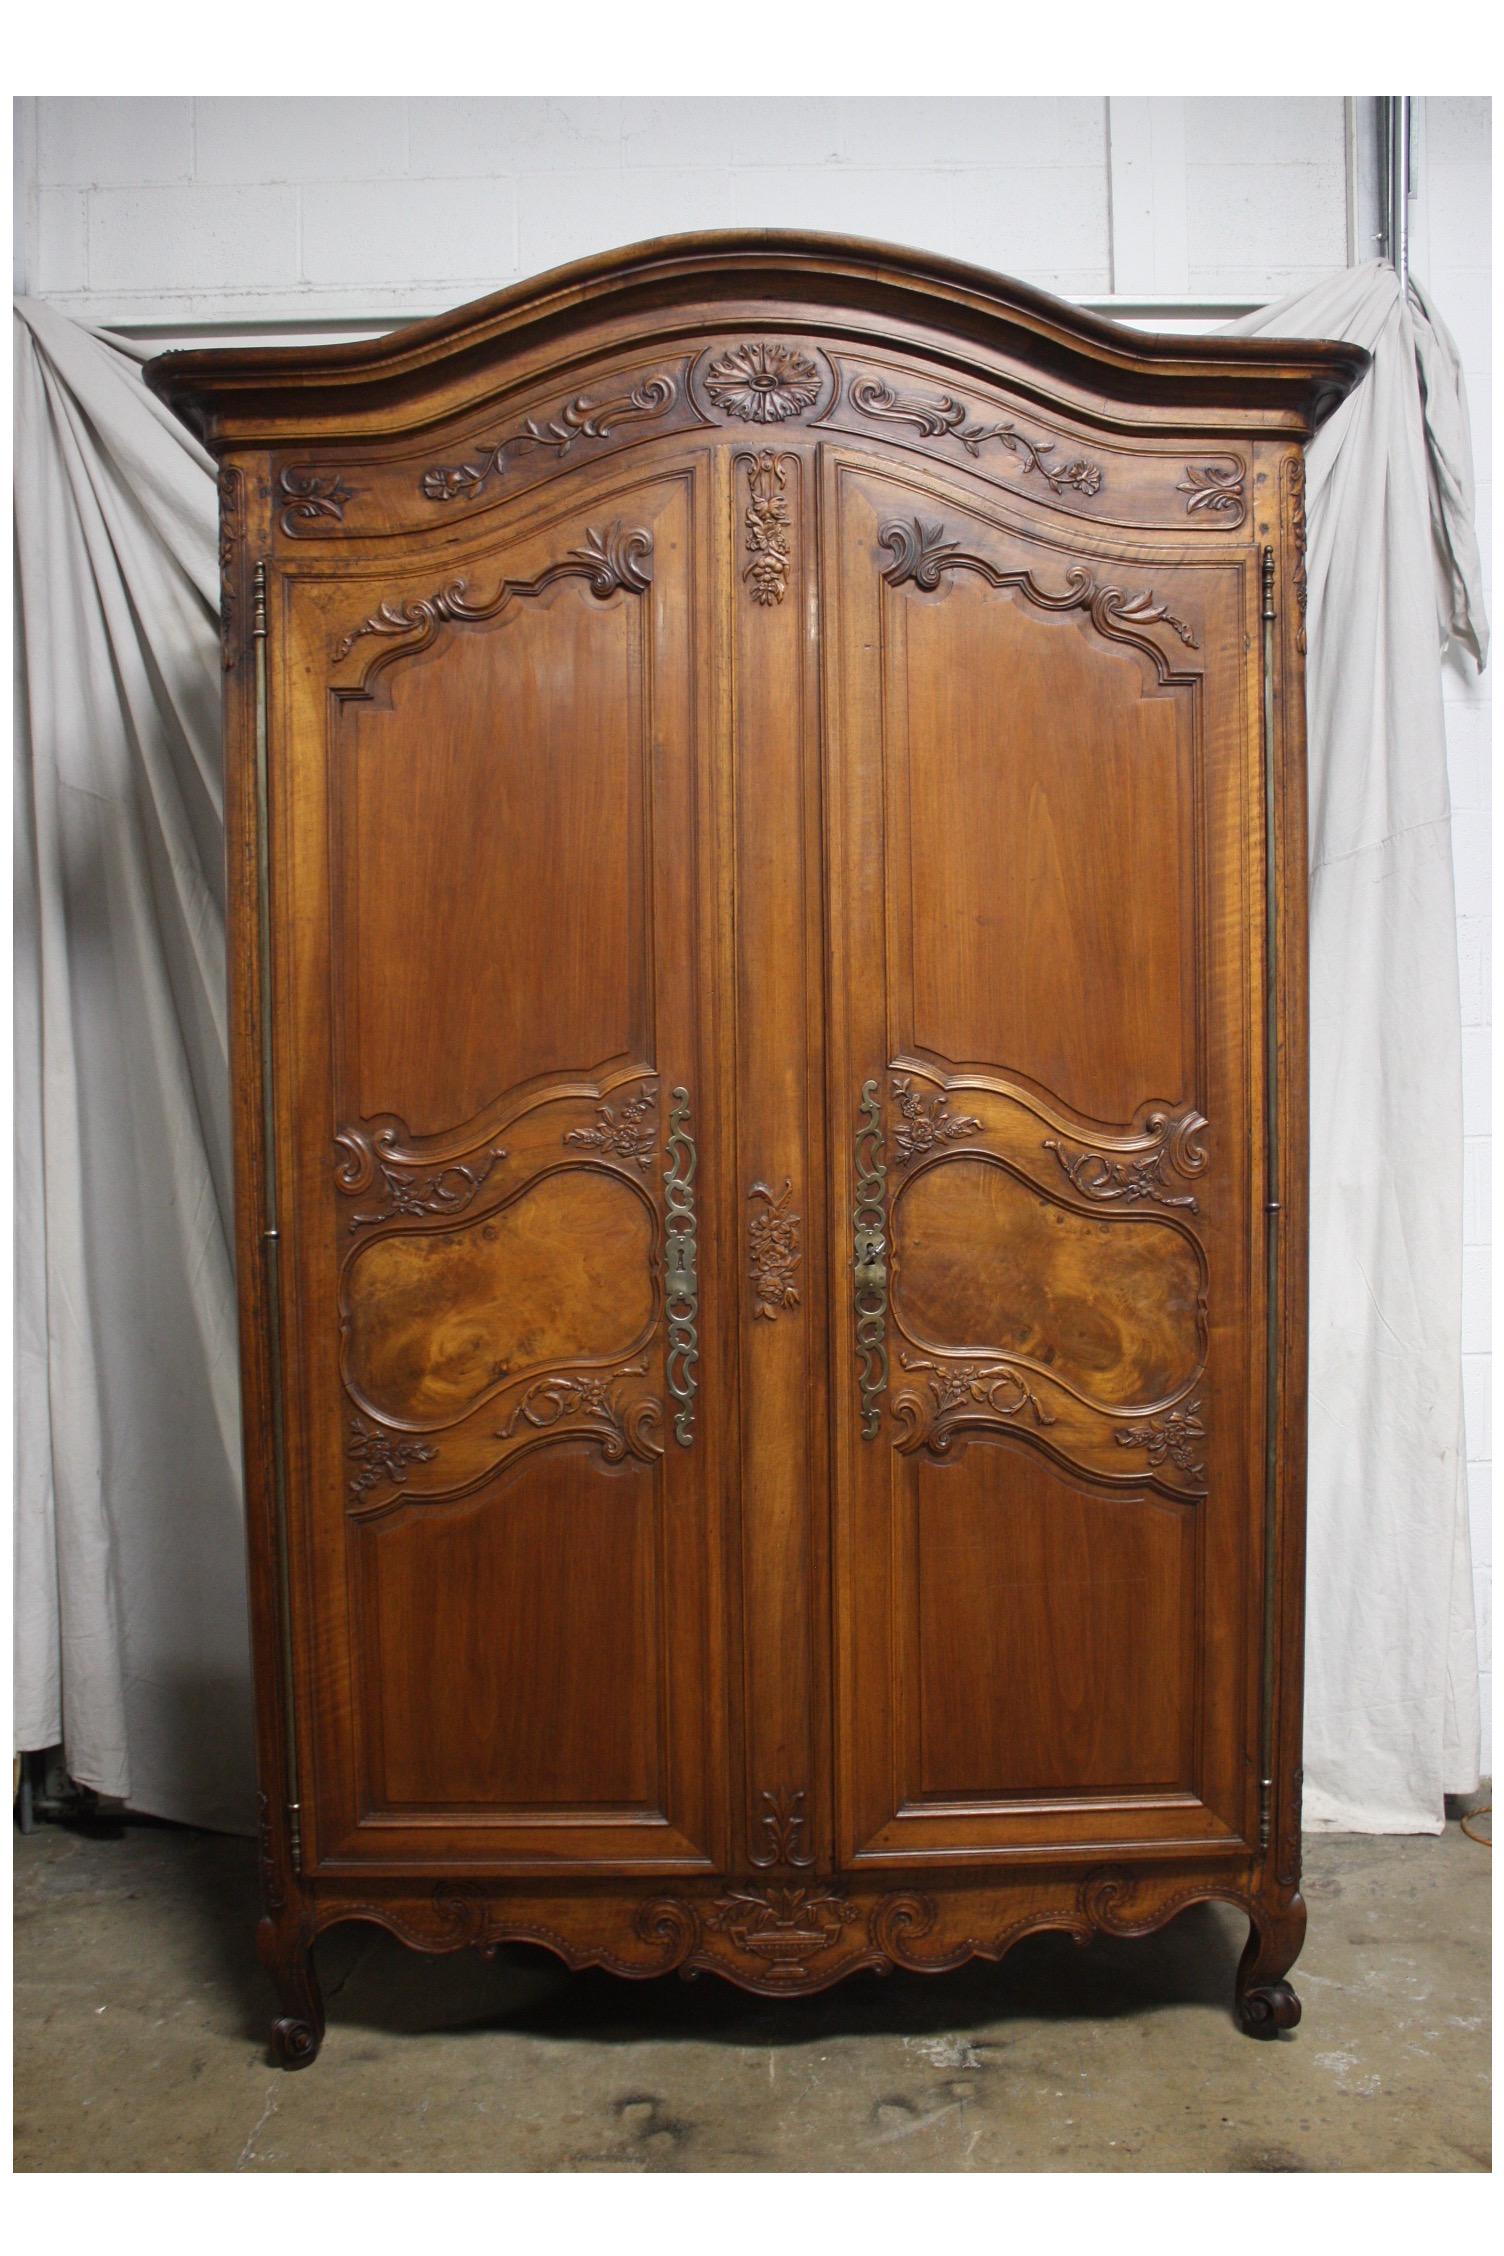 Magnificent 18th century French wardrobe.